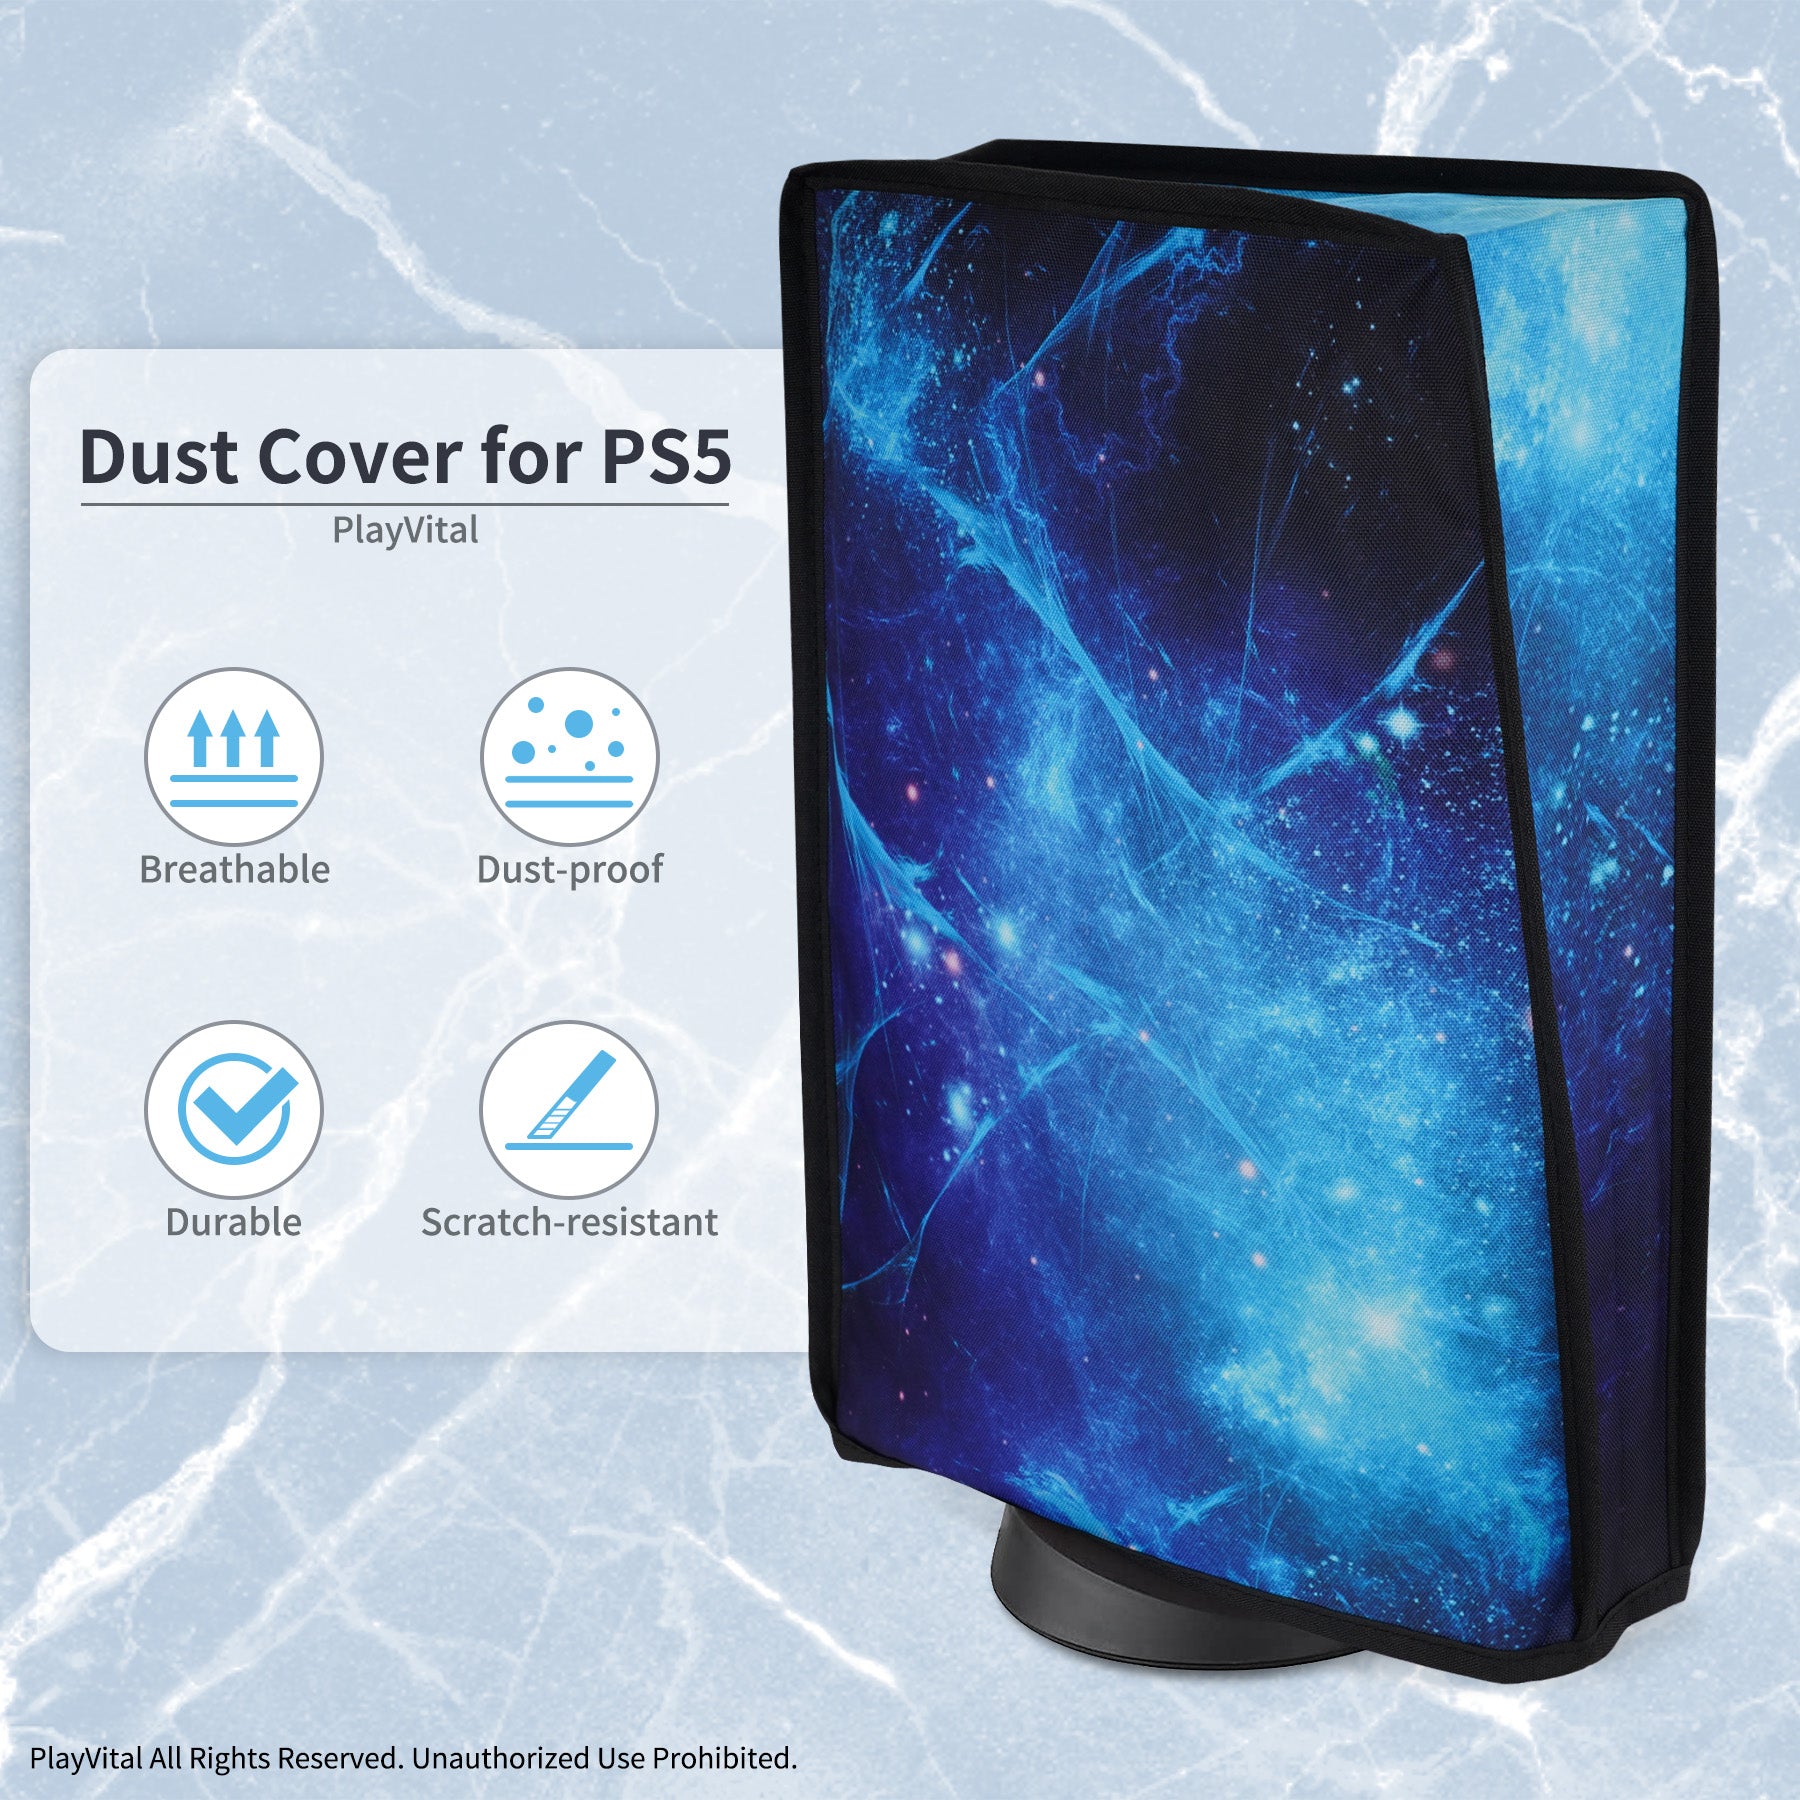 PlayVital Dust Cover for ps5, Soft Neat Lining Dust Guard for ps5 Console, Anti Scratch Waterproof Cover Sleeve for ps5 Console Digital Edition & Disc Edition - Blue Nebula - PFPJ102 PlayVital